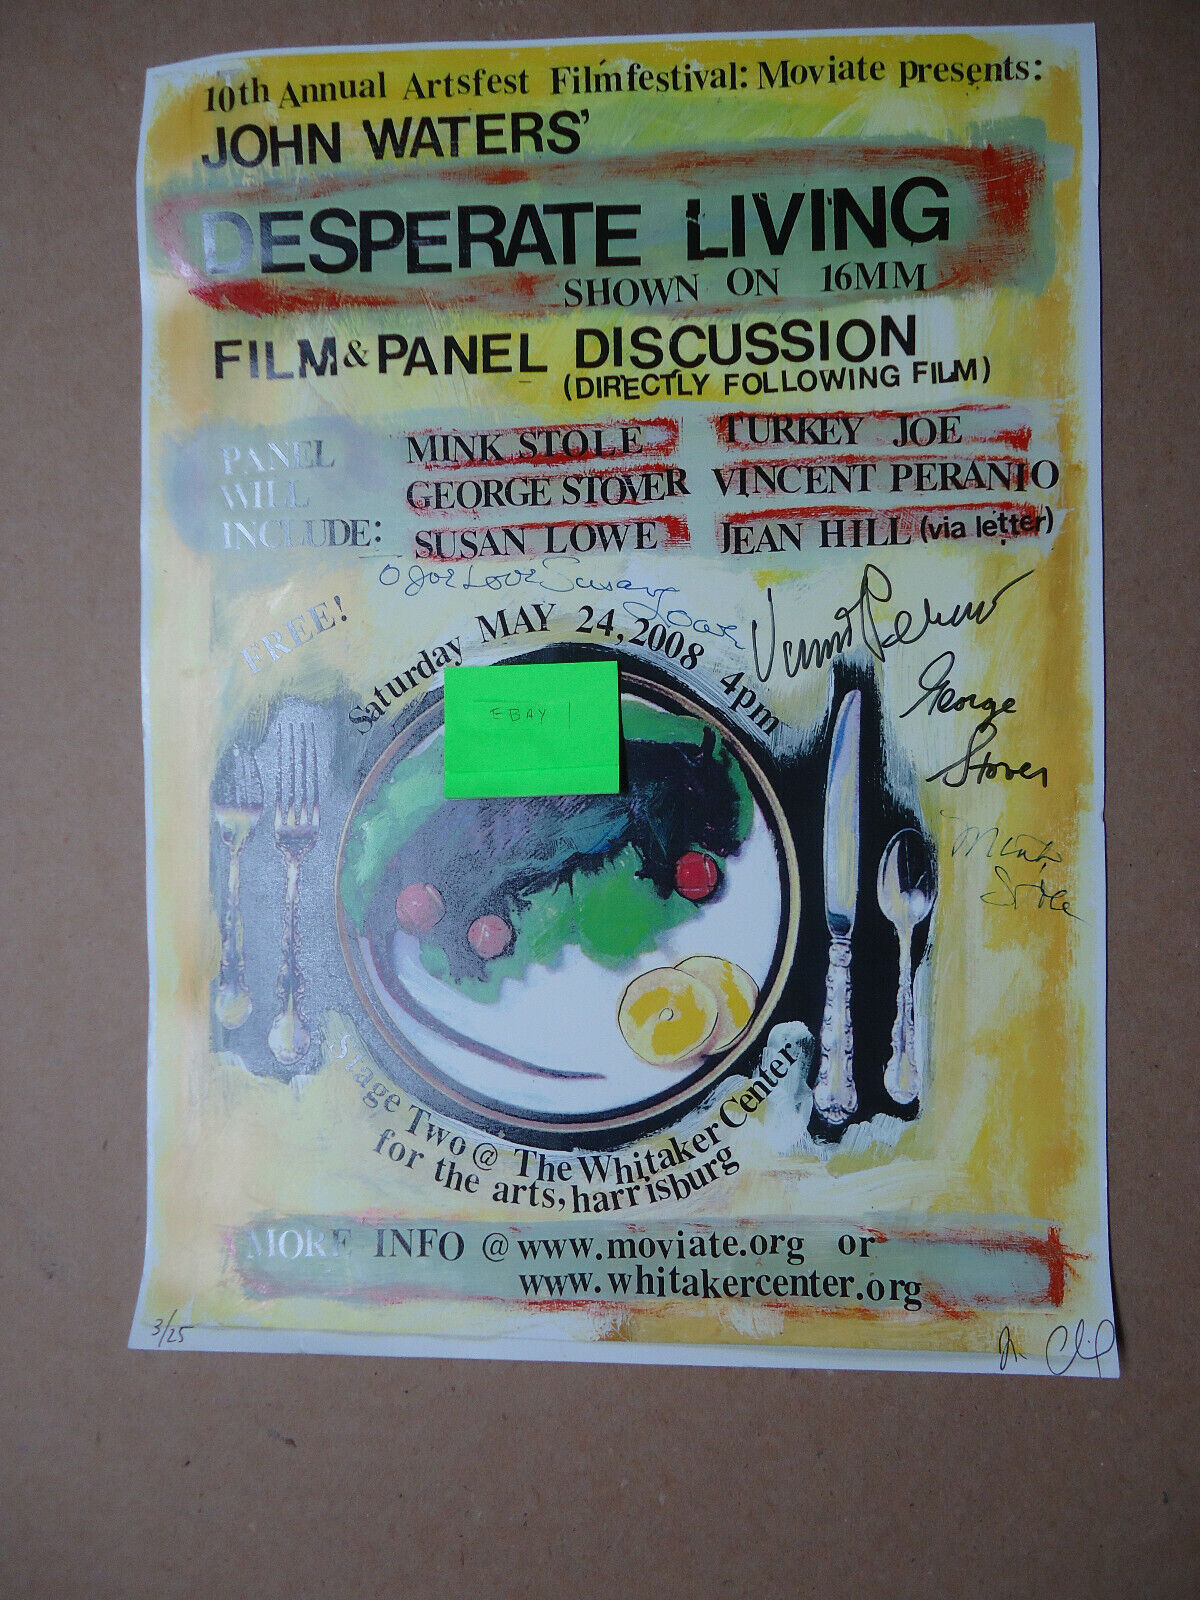 John Waters Desperate Living 2008 autographed poster of 1977 film discussion